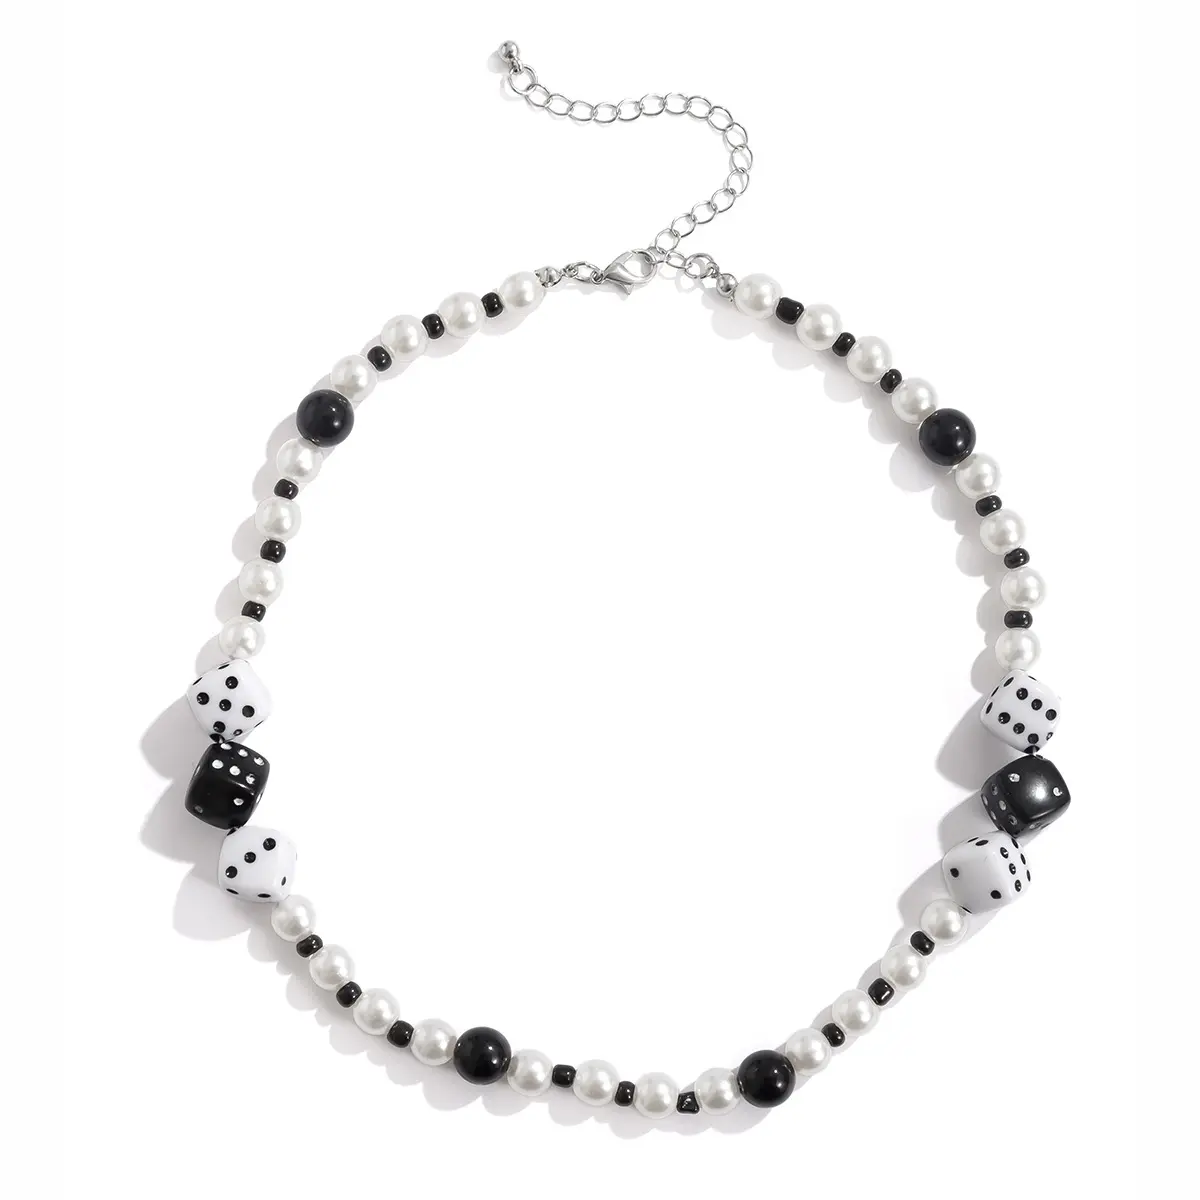 DUYIZHAO New Trendy Black And White Dice Pearl Necklaces Men Fashion Jewelry Beaded Necklaces For Gift Party Wholesale